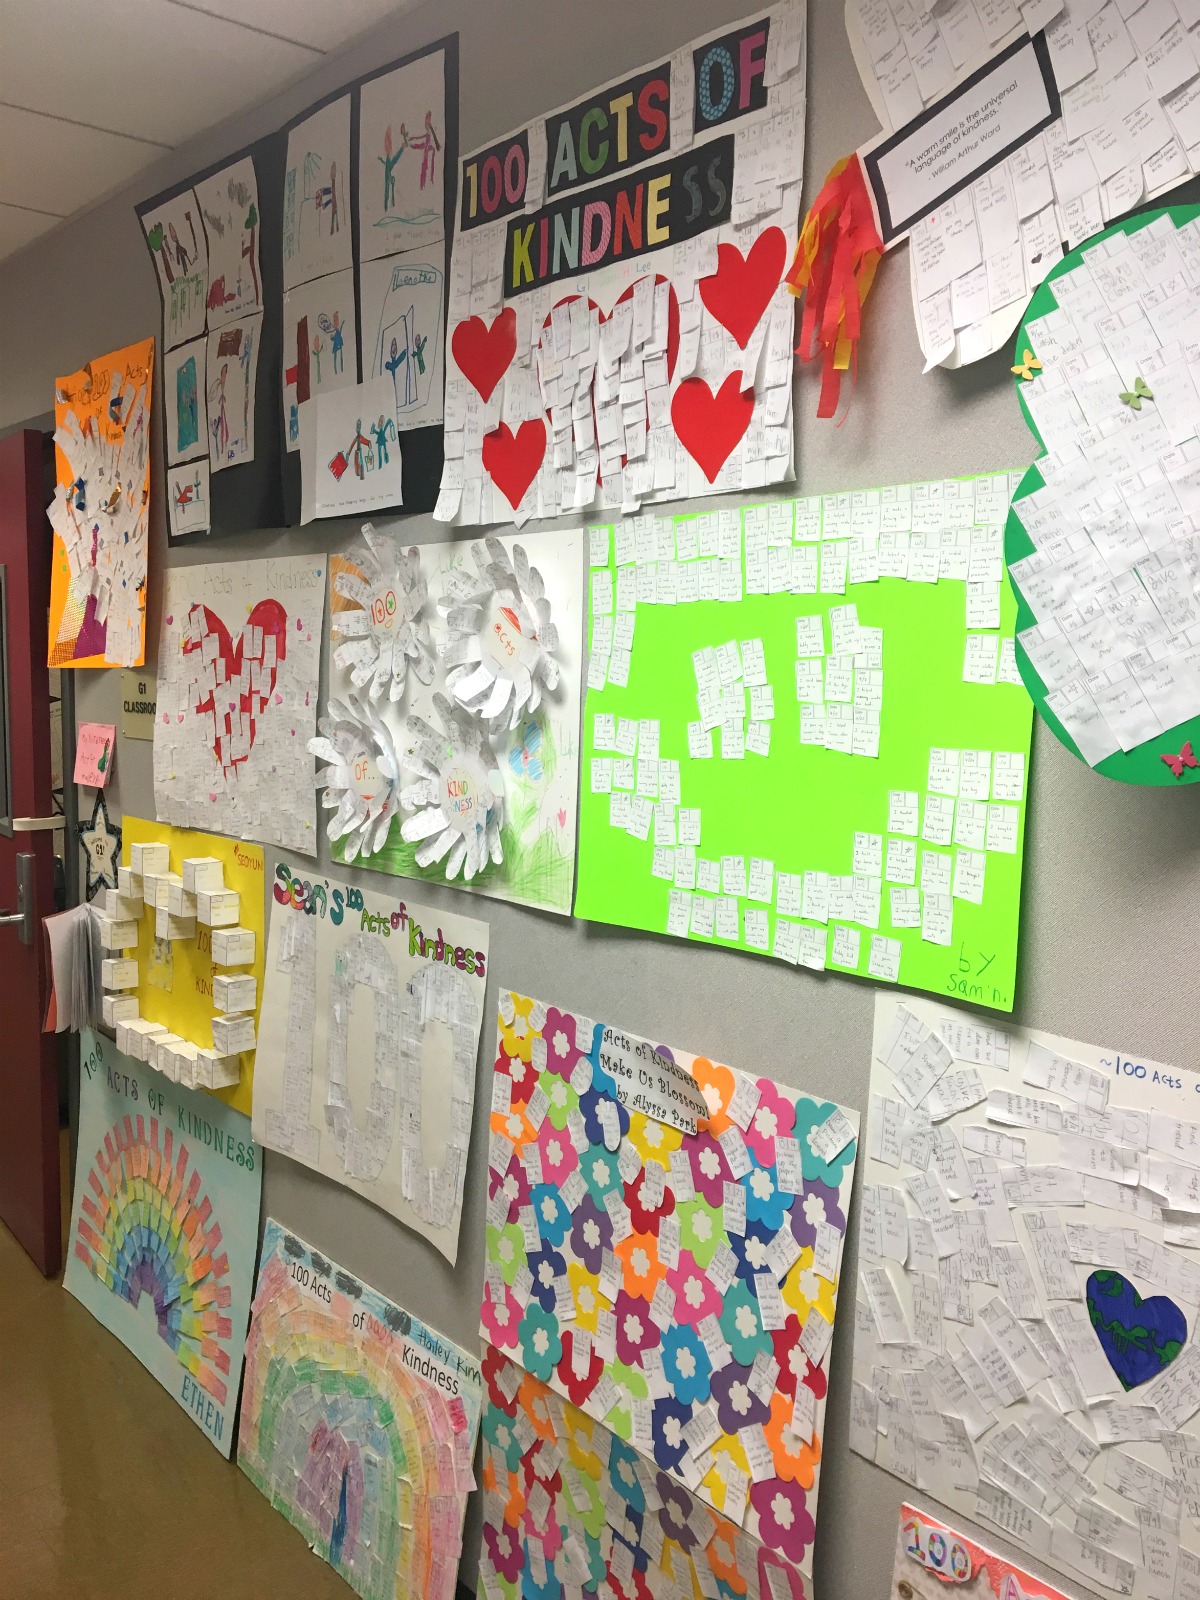 Kindness posters at Fisler Elementary School